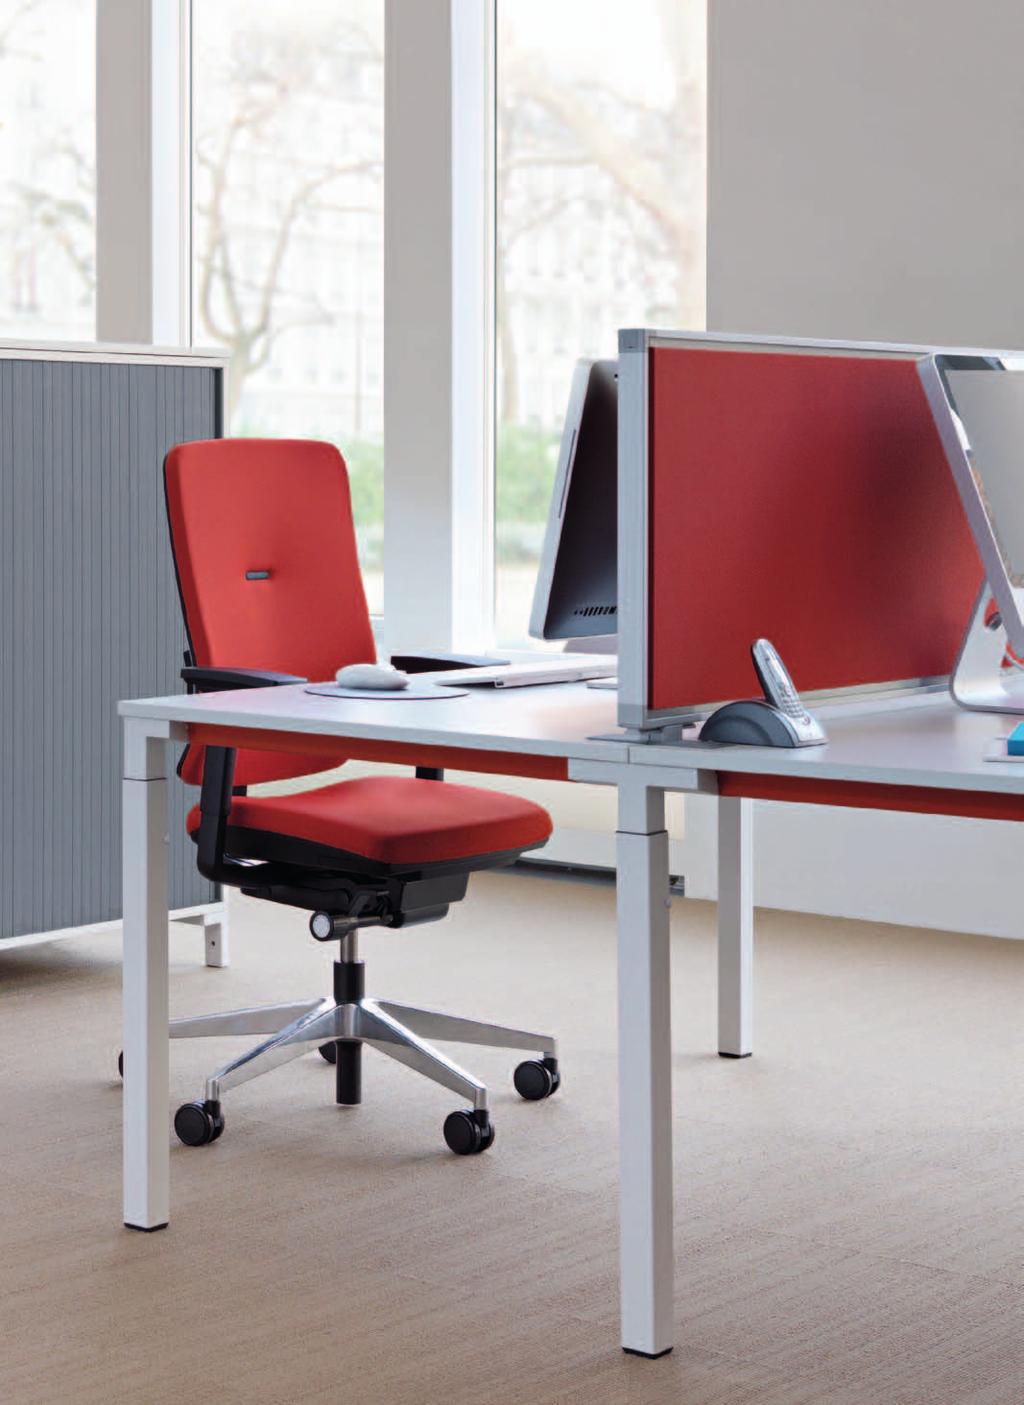 Kalidro Essentials for an inspirational workday Kalidro is an all-in-one workstation for the essential demands of today s office.